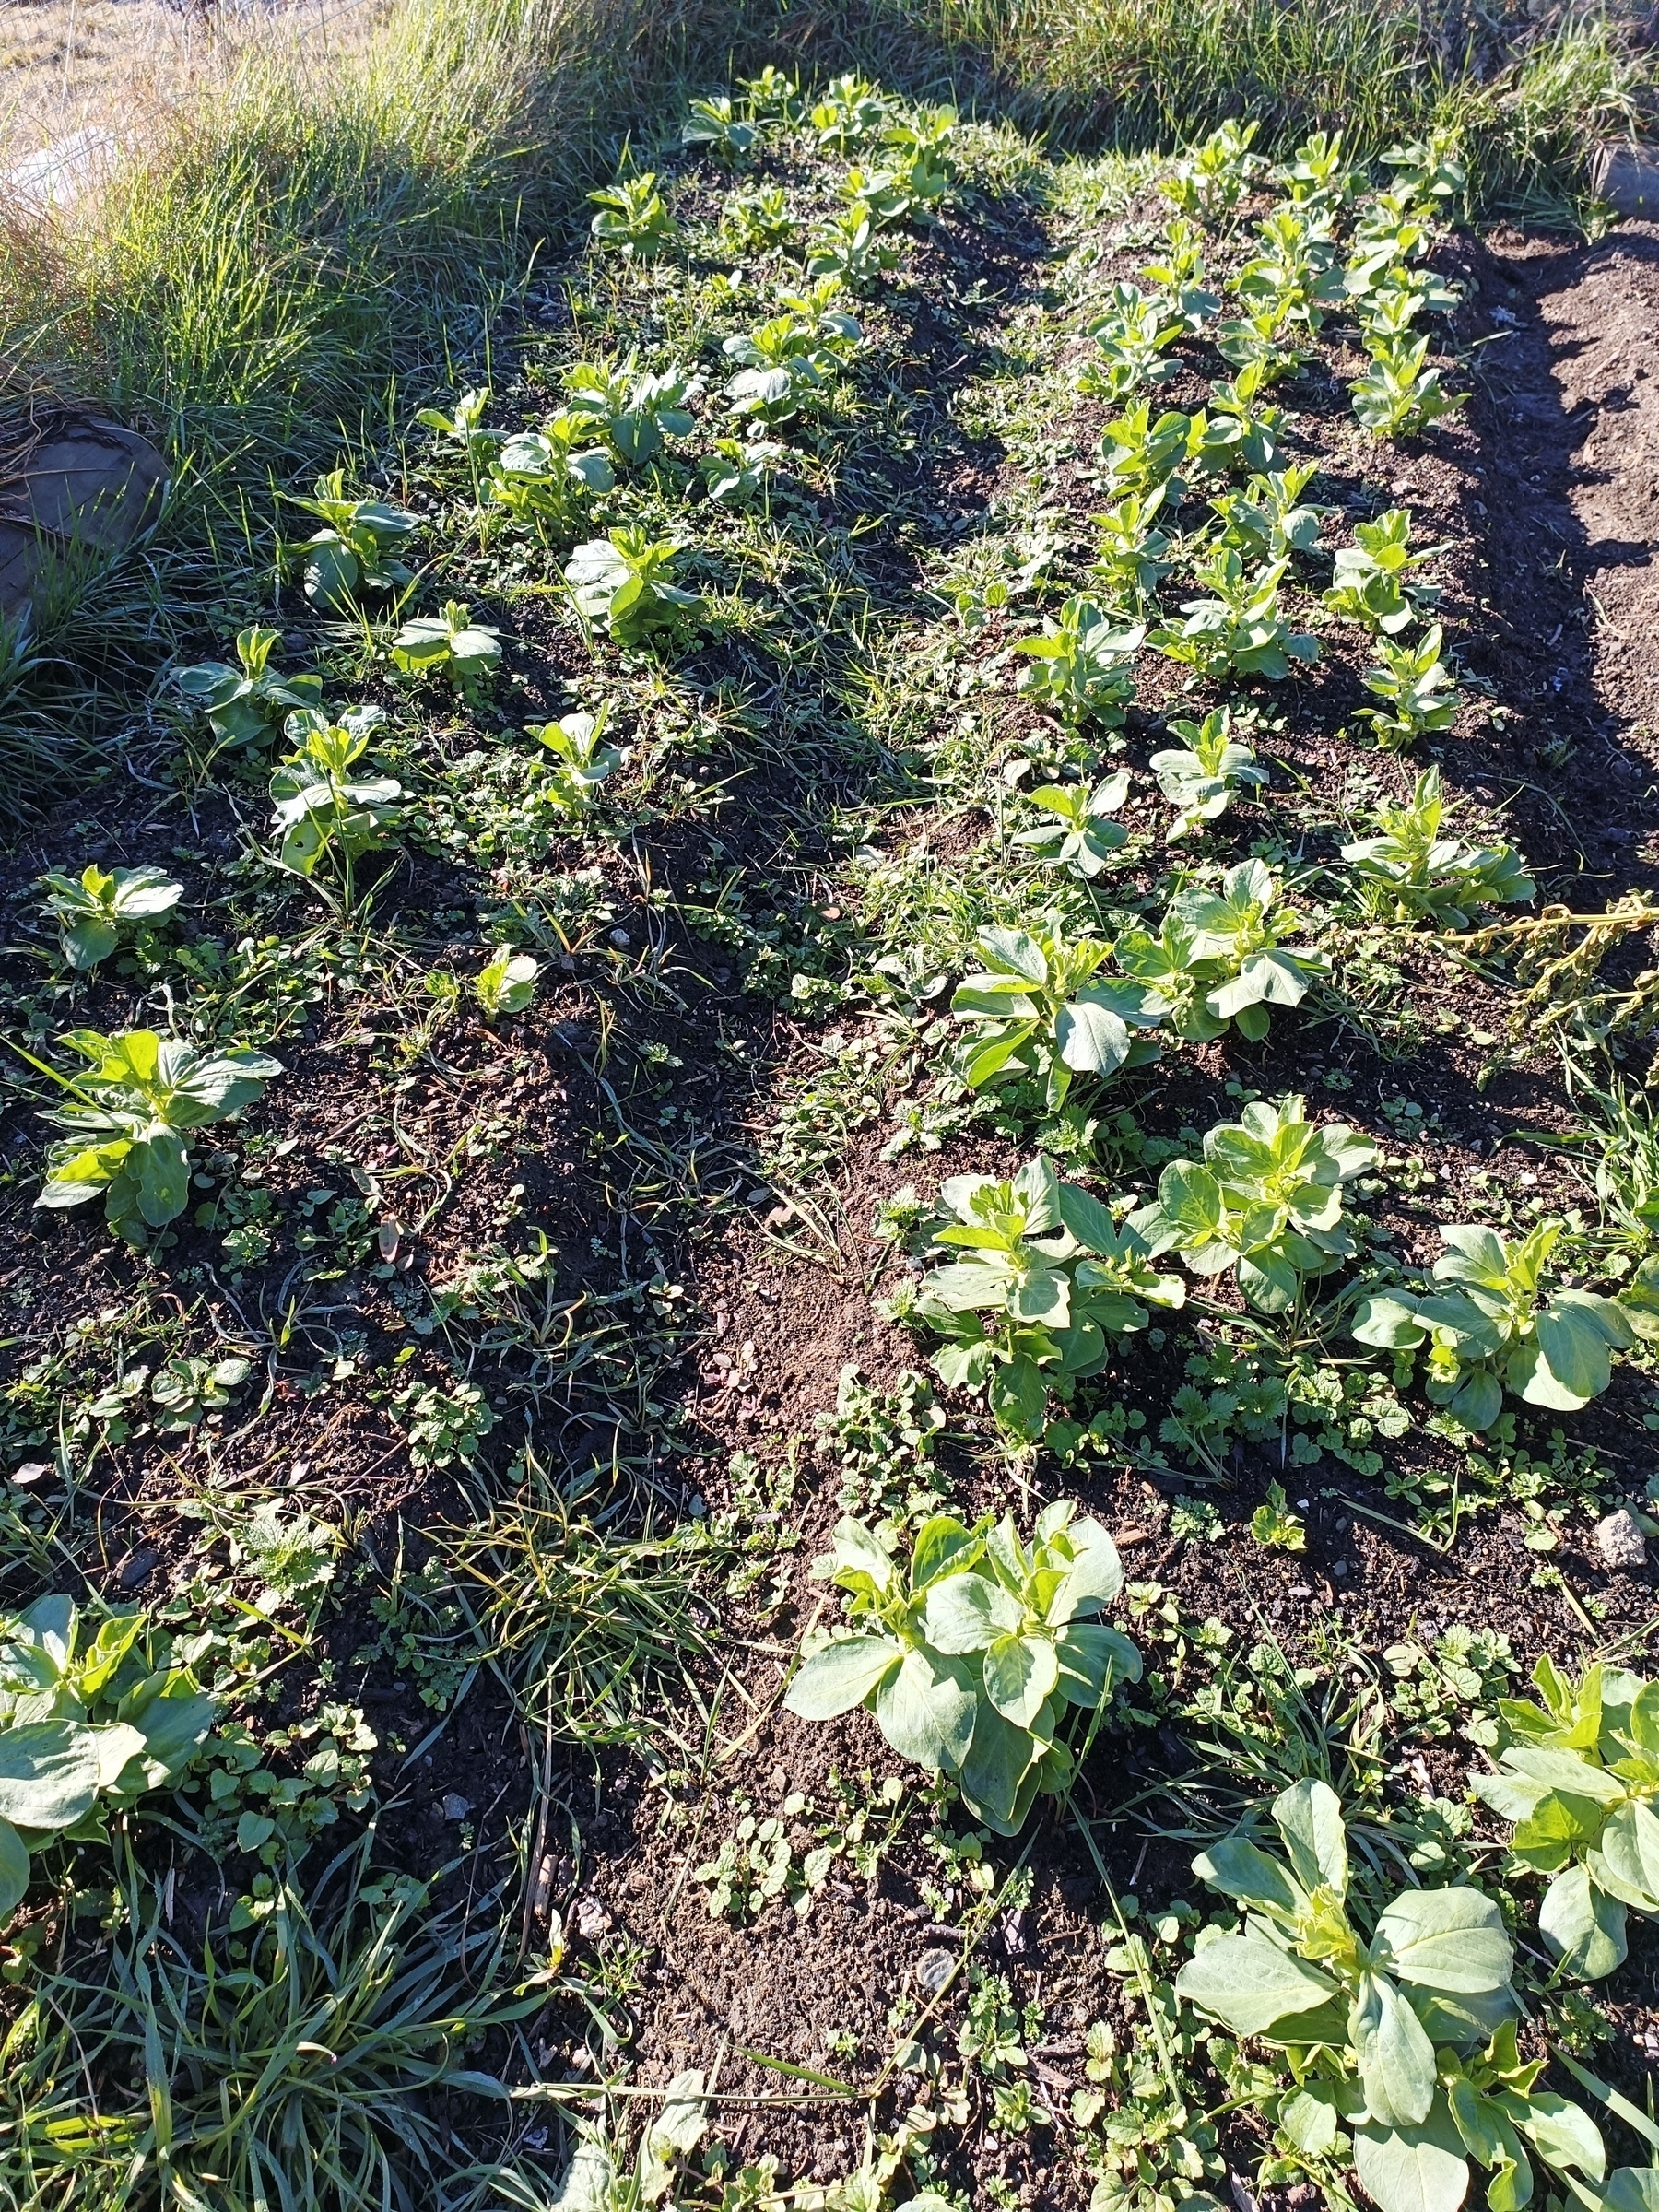 Two rows of broad beans.. and weeds